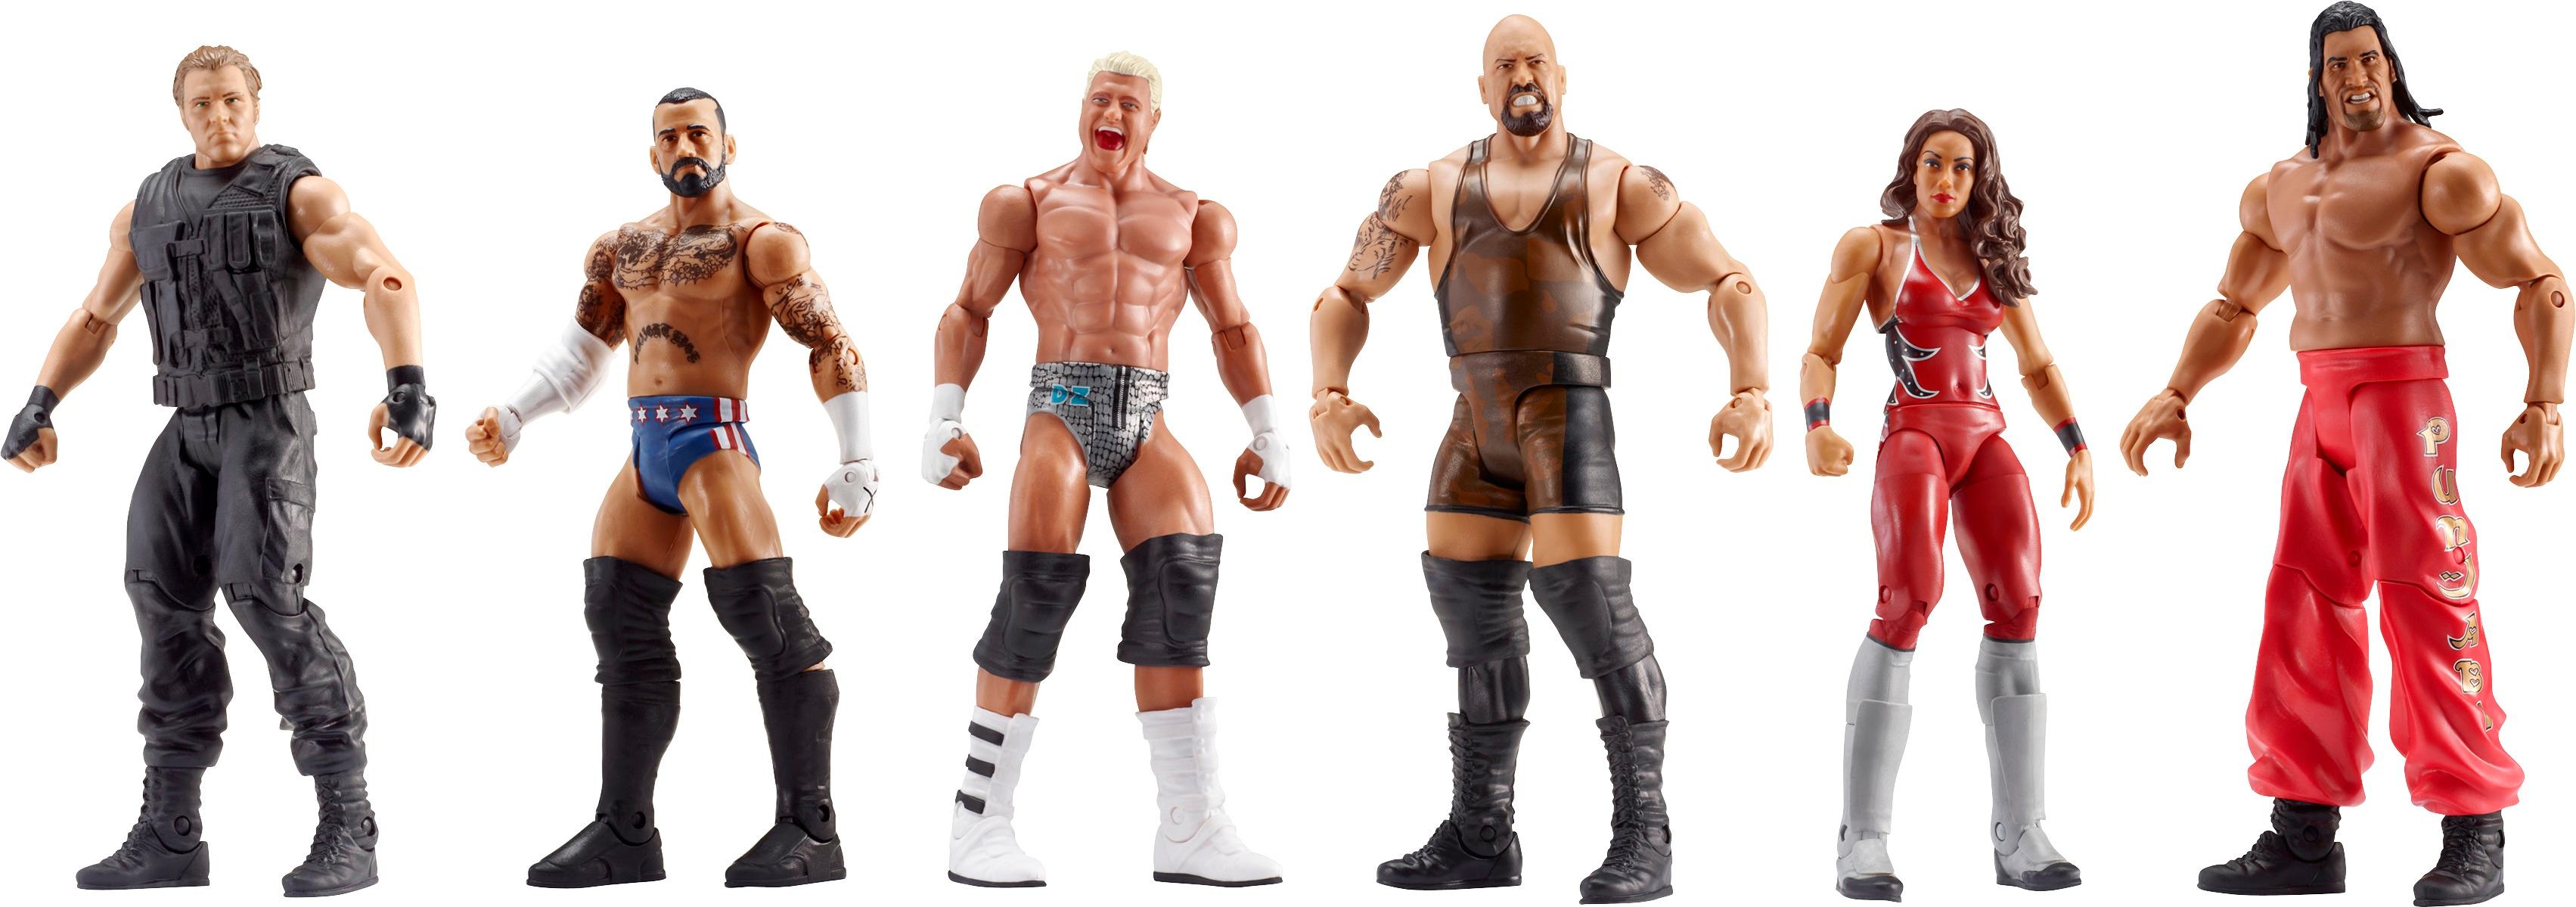 WWE Elite Collection 6 Action Figure Styles May Vary GDF60 - Best Buy